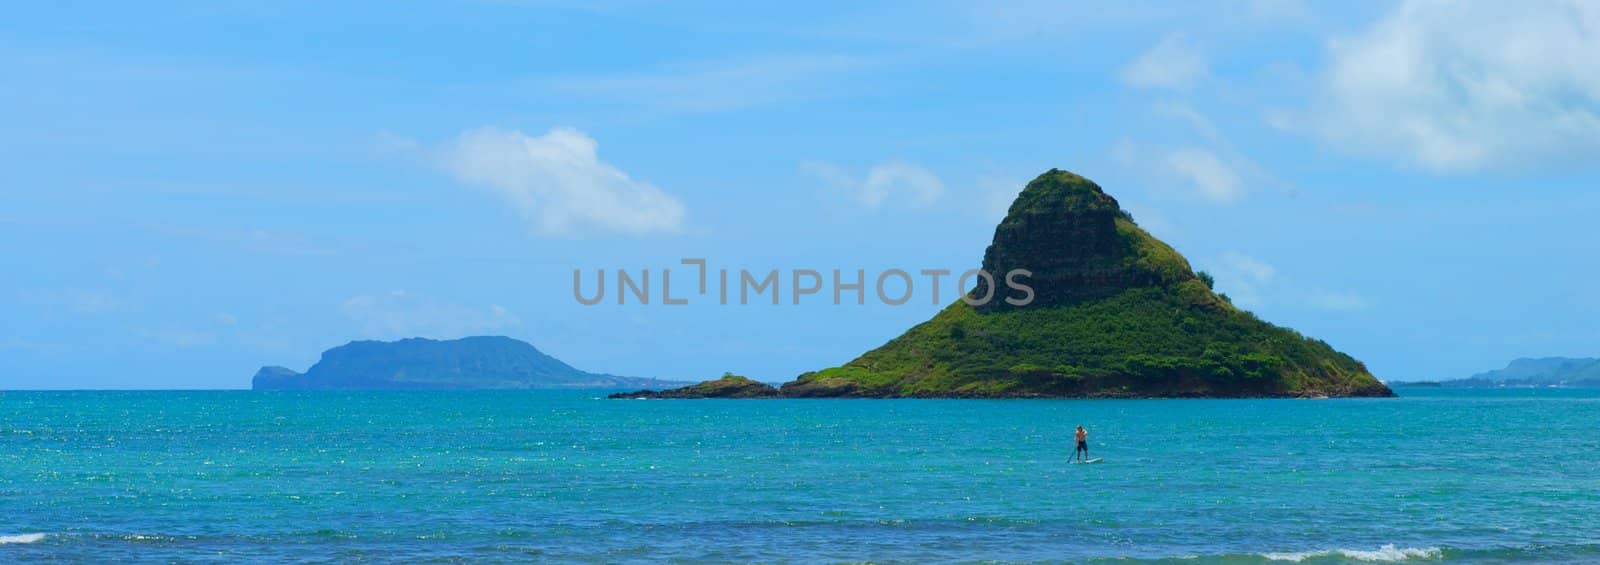 Rock Formation Off the Coast of Ohau, Hawaii by pixelsnap